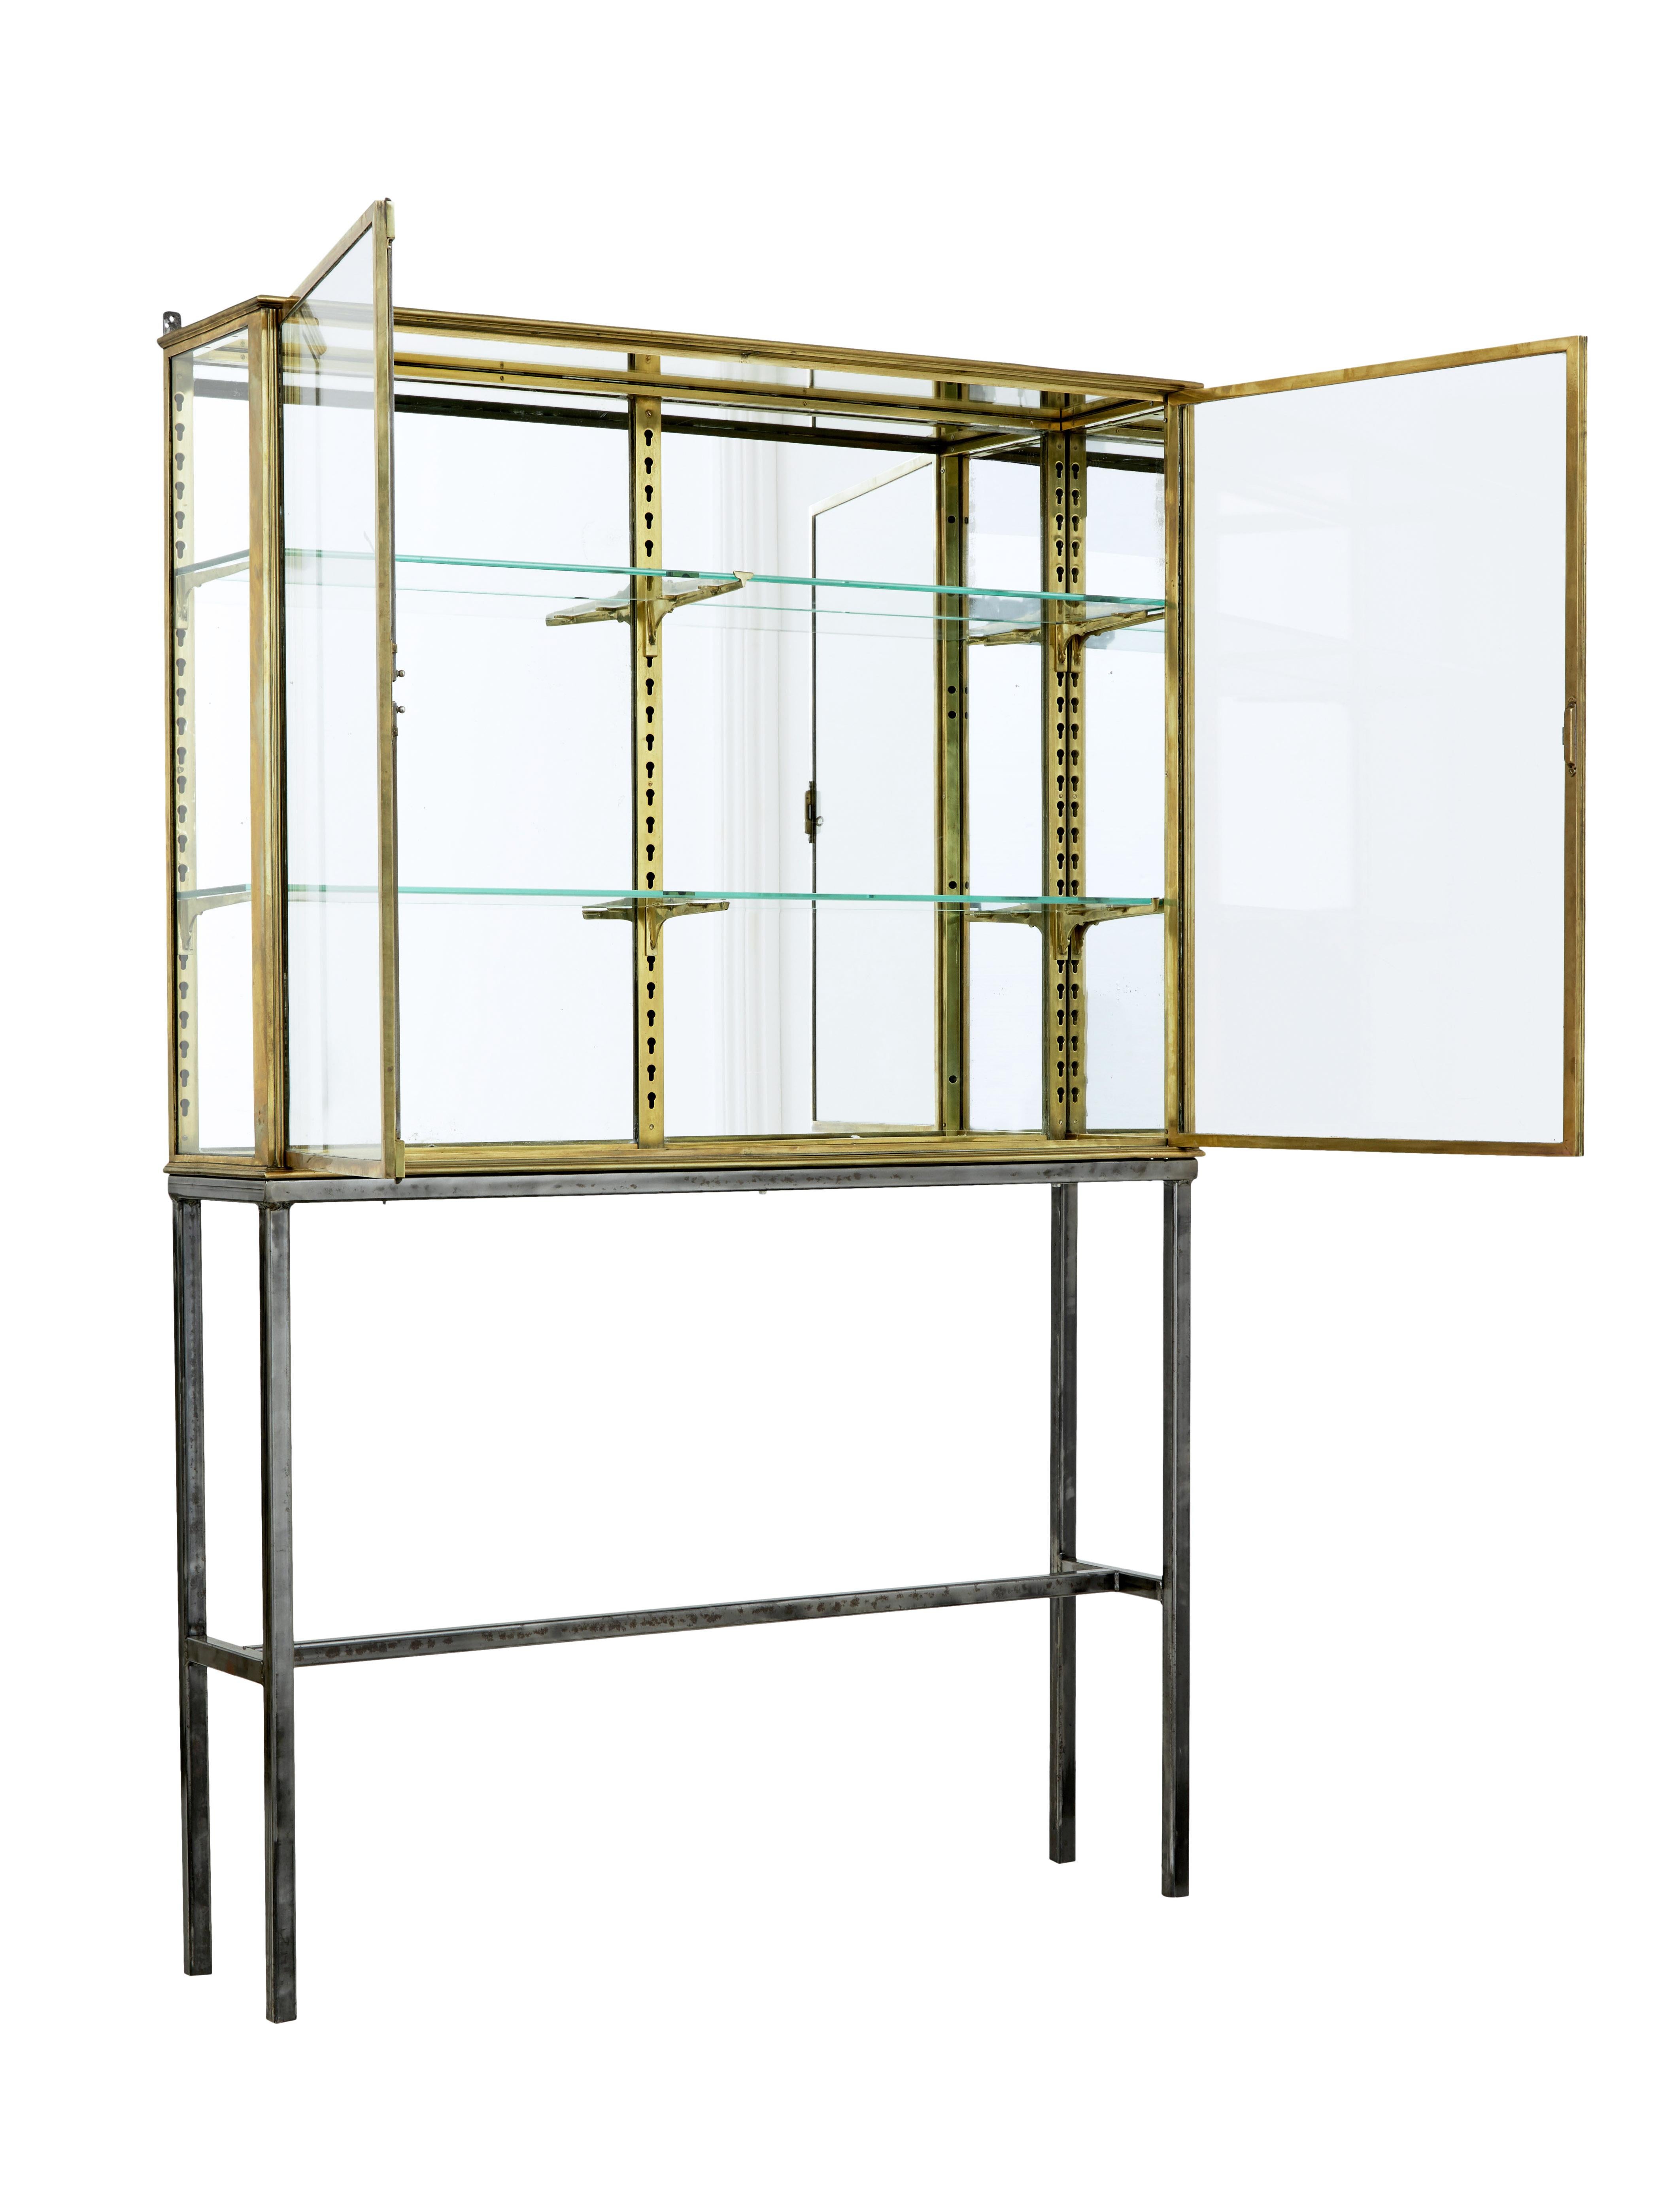 French 1920s brass glazed shop display cabinet by siegel, circa 1920.

Fine piece of cabinet making by well known parisian maker siegel. Solid brass frame glazed to the left and mirrored panel to the right. Fitted with movable brackets to